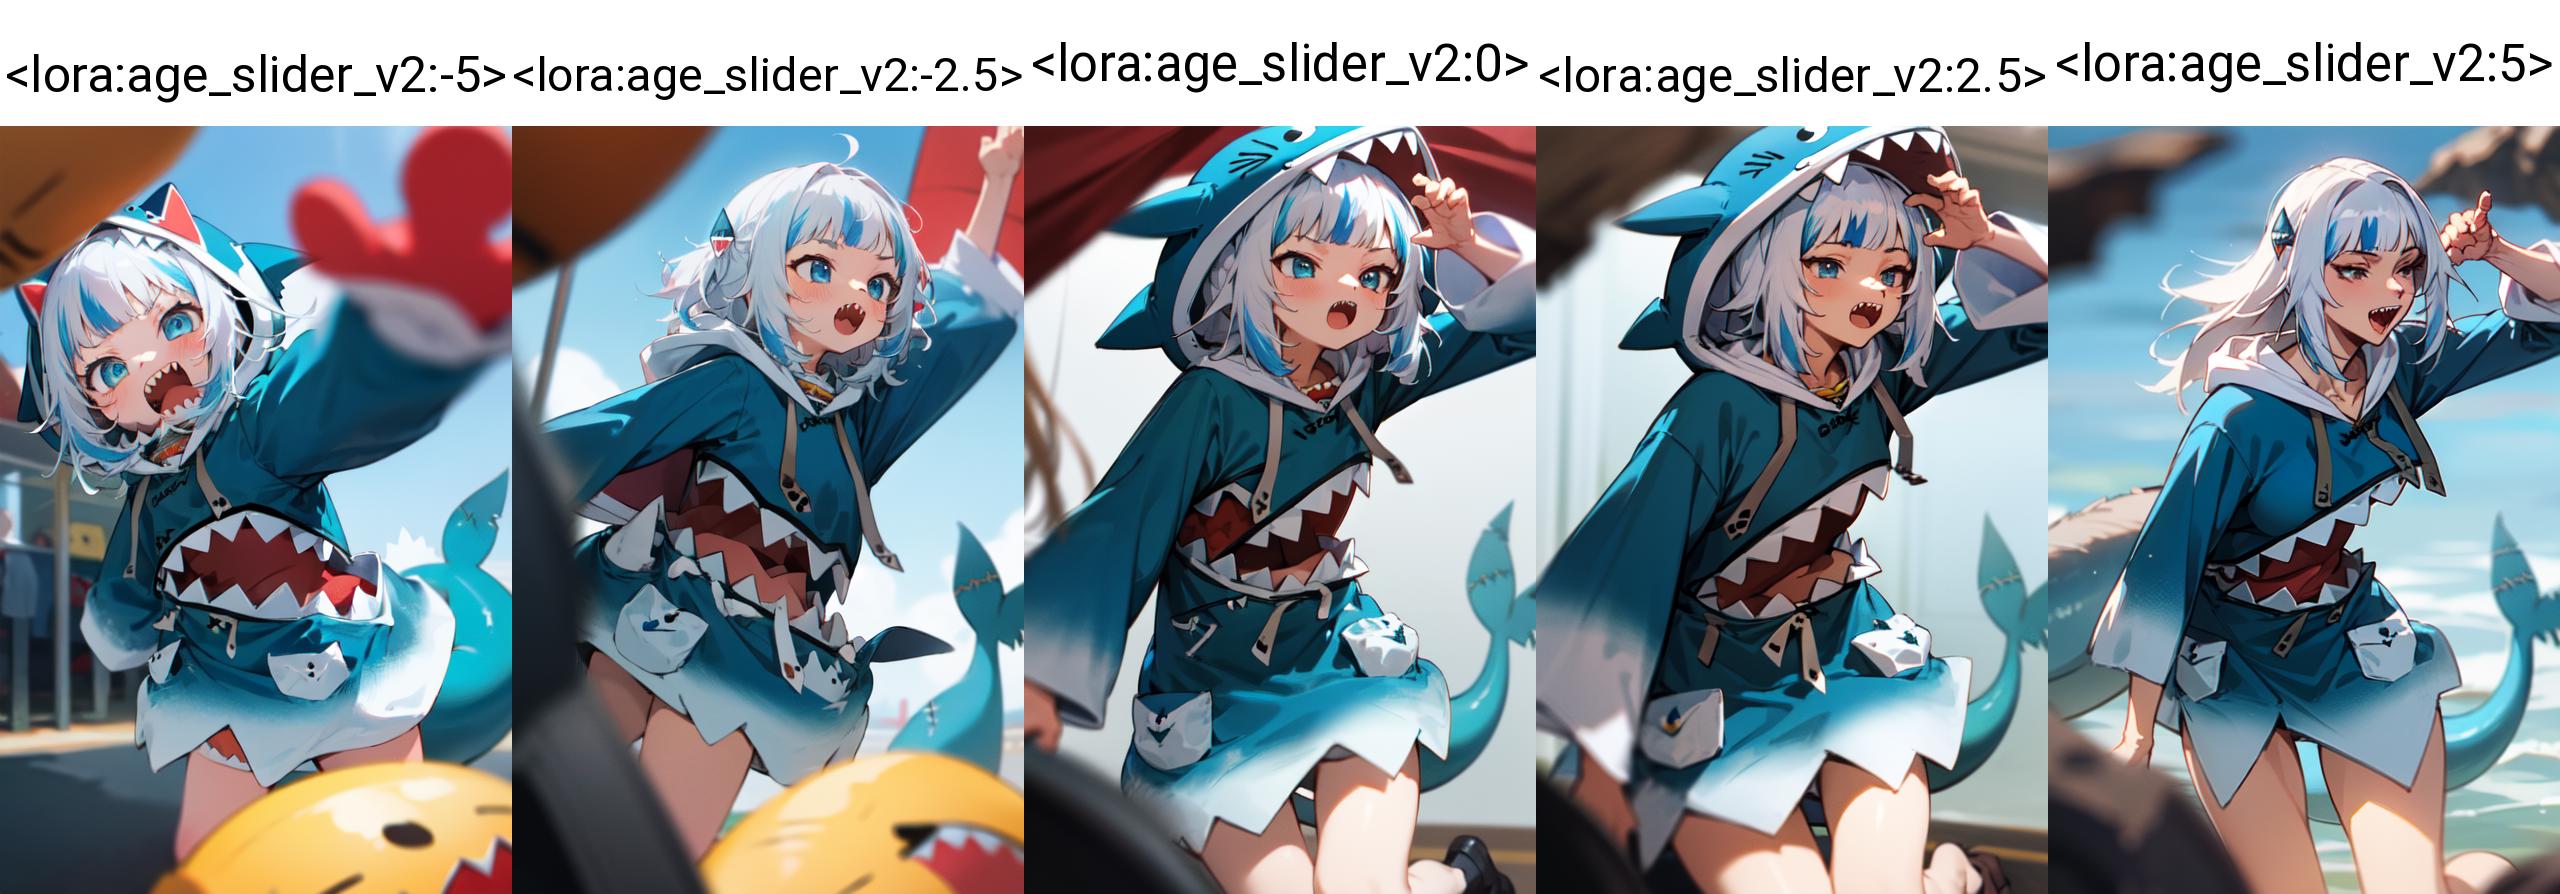 Age Slider LoRA (for anime) image by Poiuytrezay